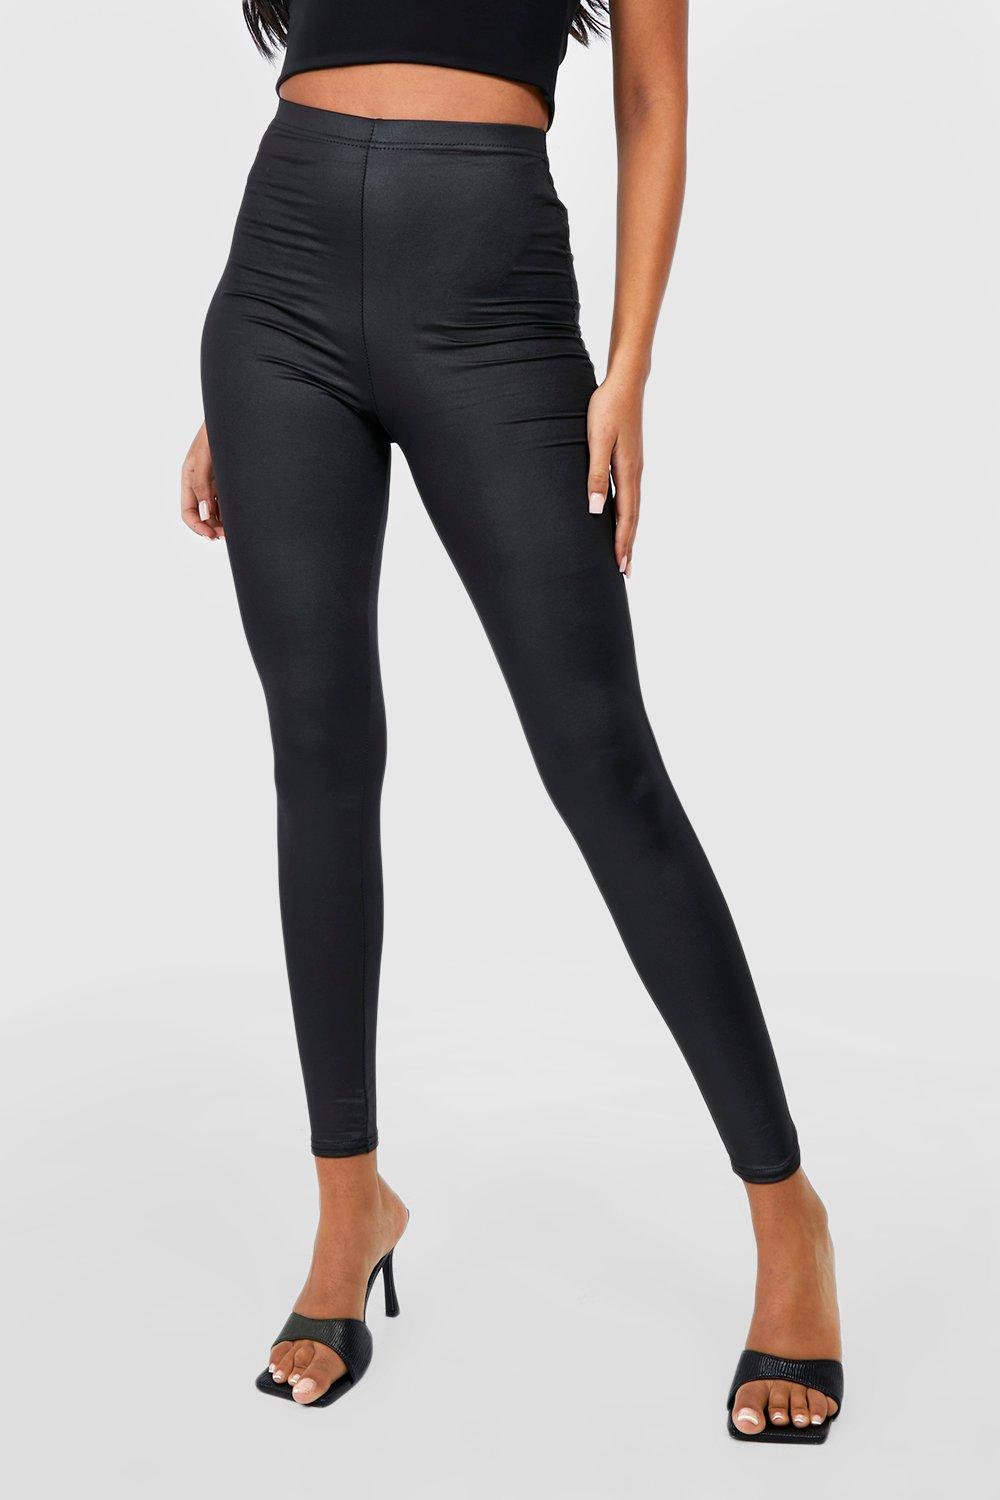 Tall Faux Leather High Waisted Leggings